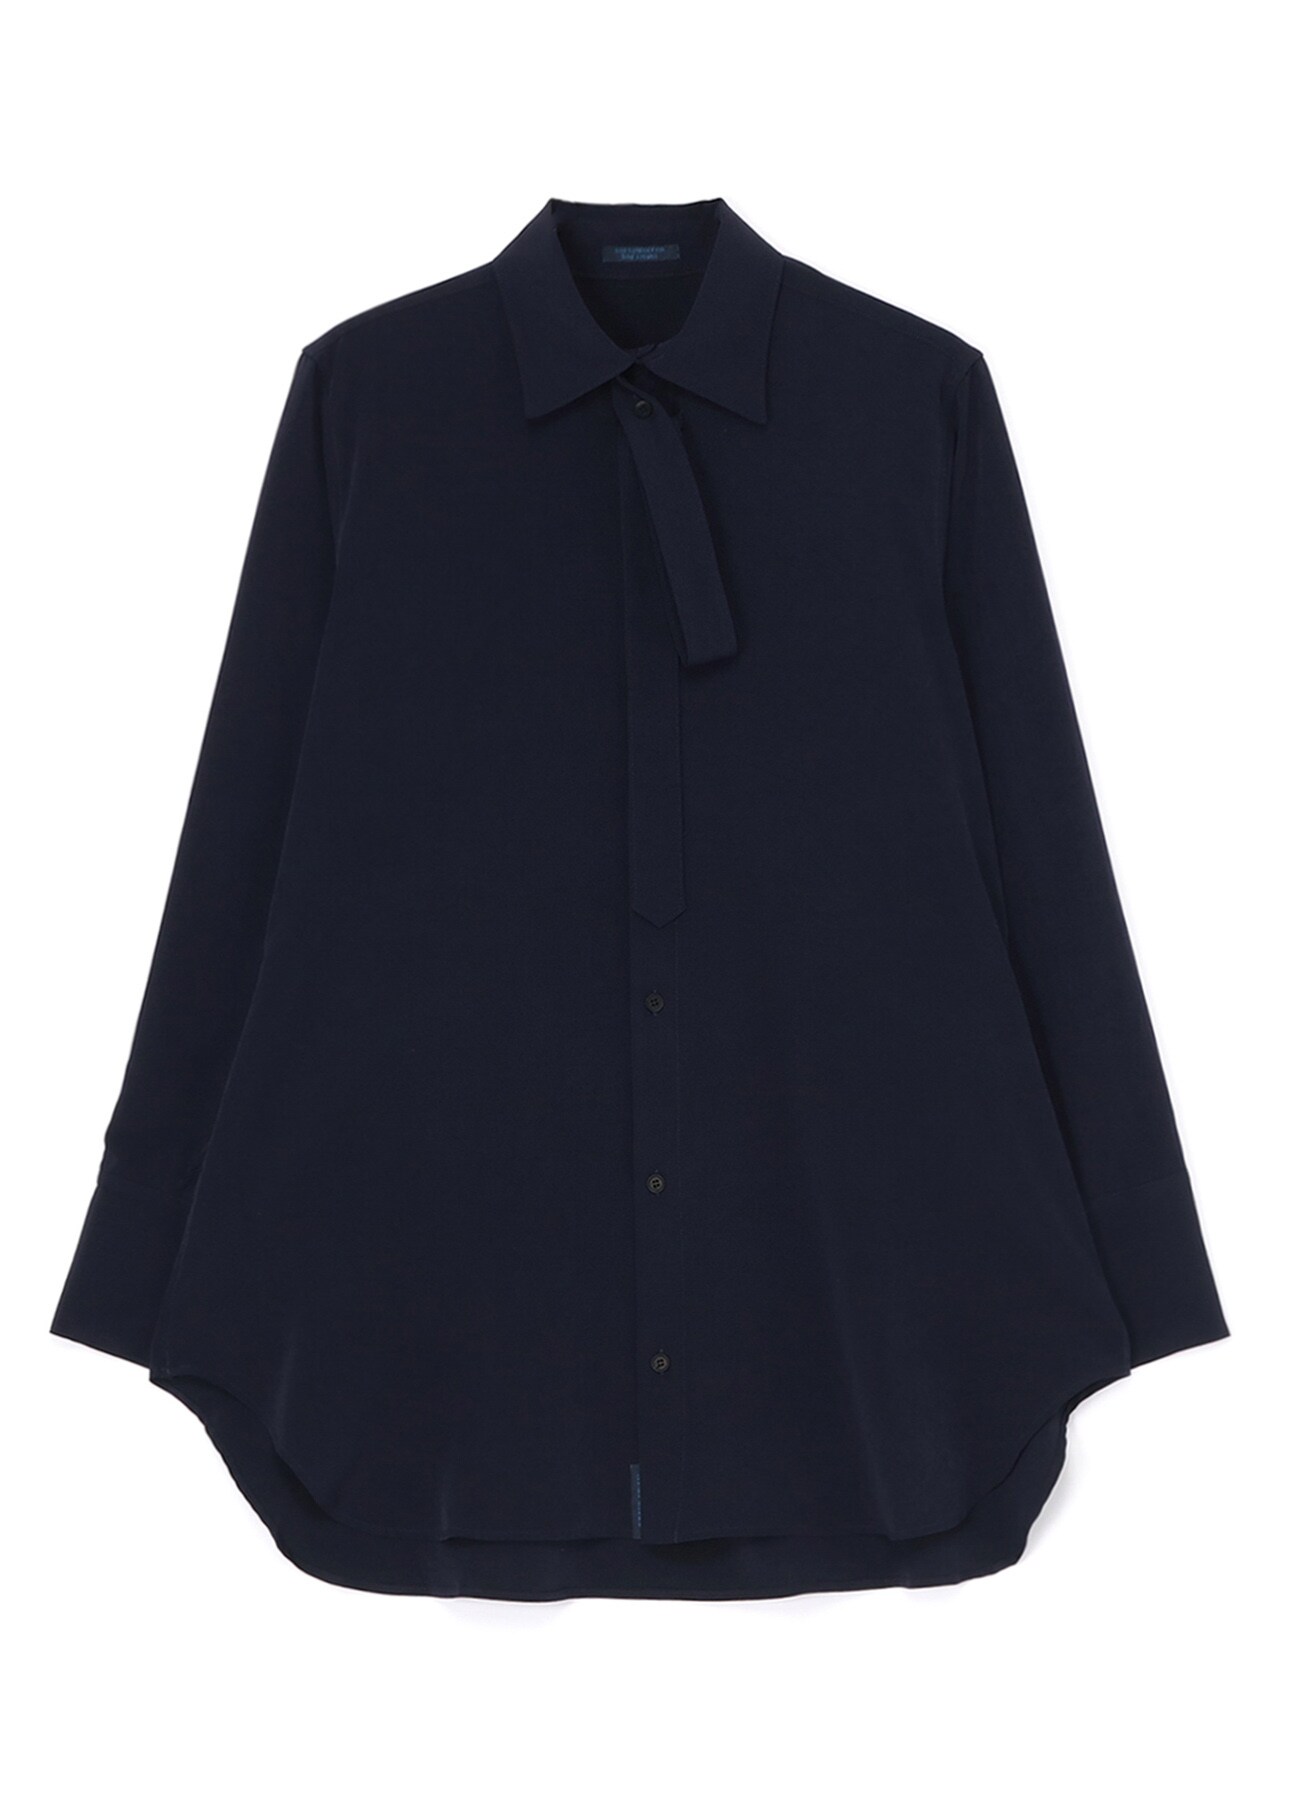 TRIACETATE/POLYESTER CREPE de CHINE SHIRT WITH DECONSTRUCTED PLACKET